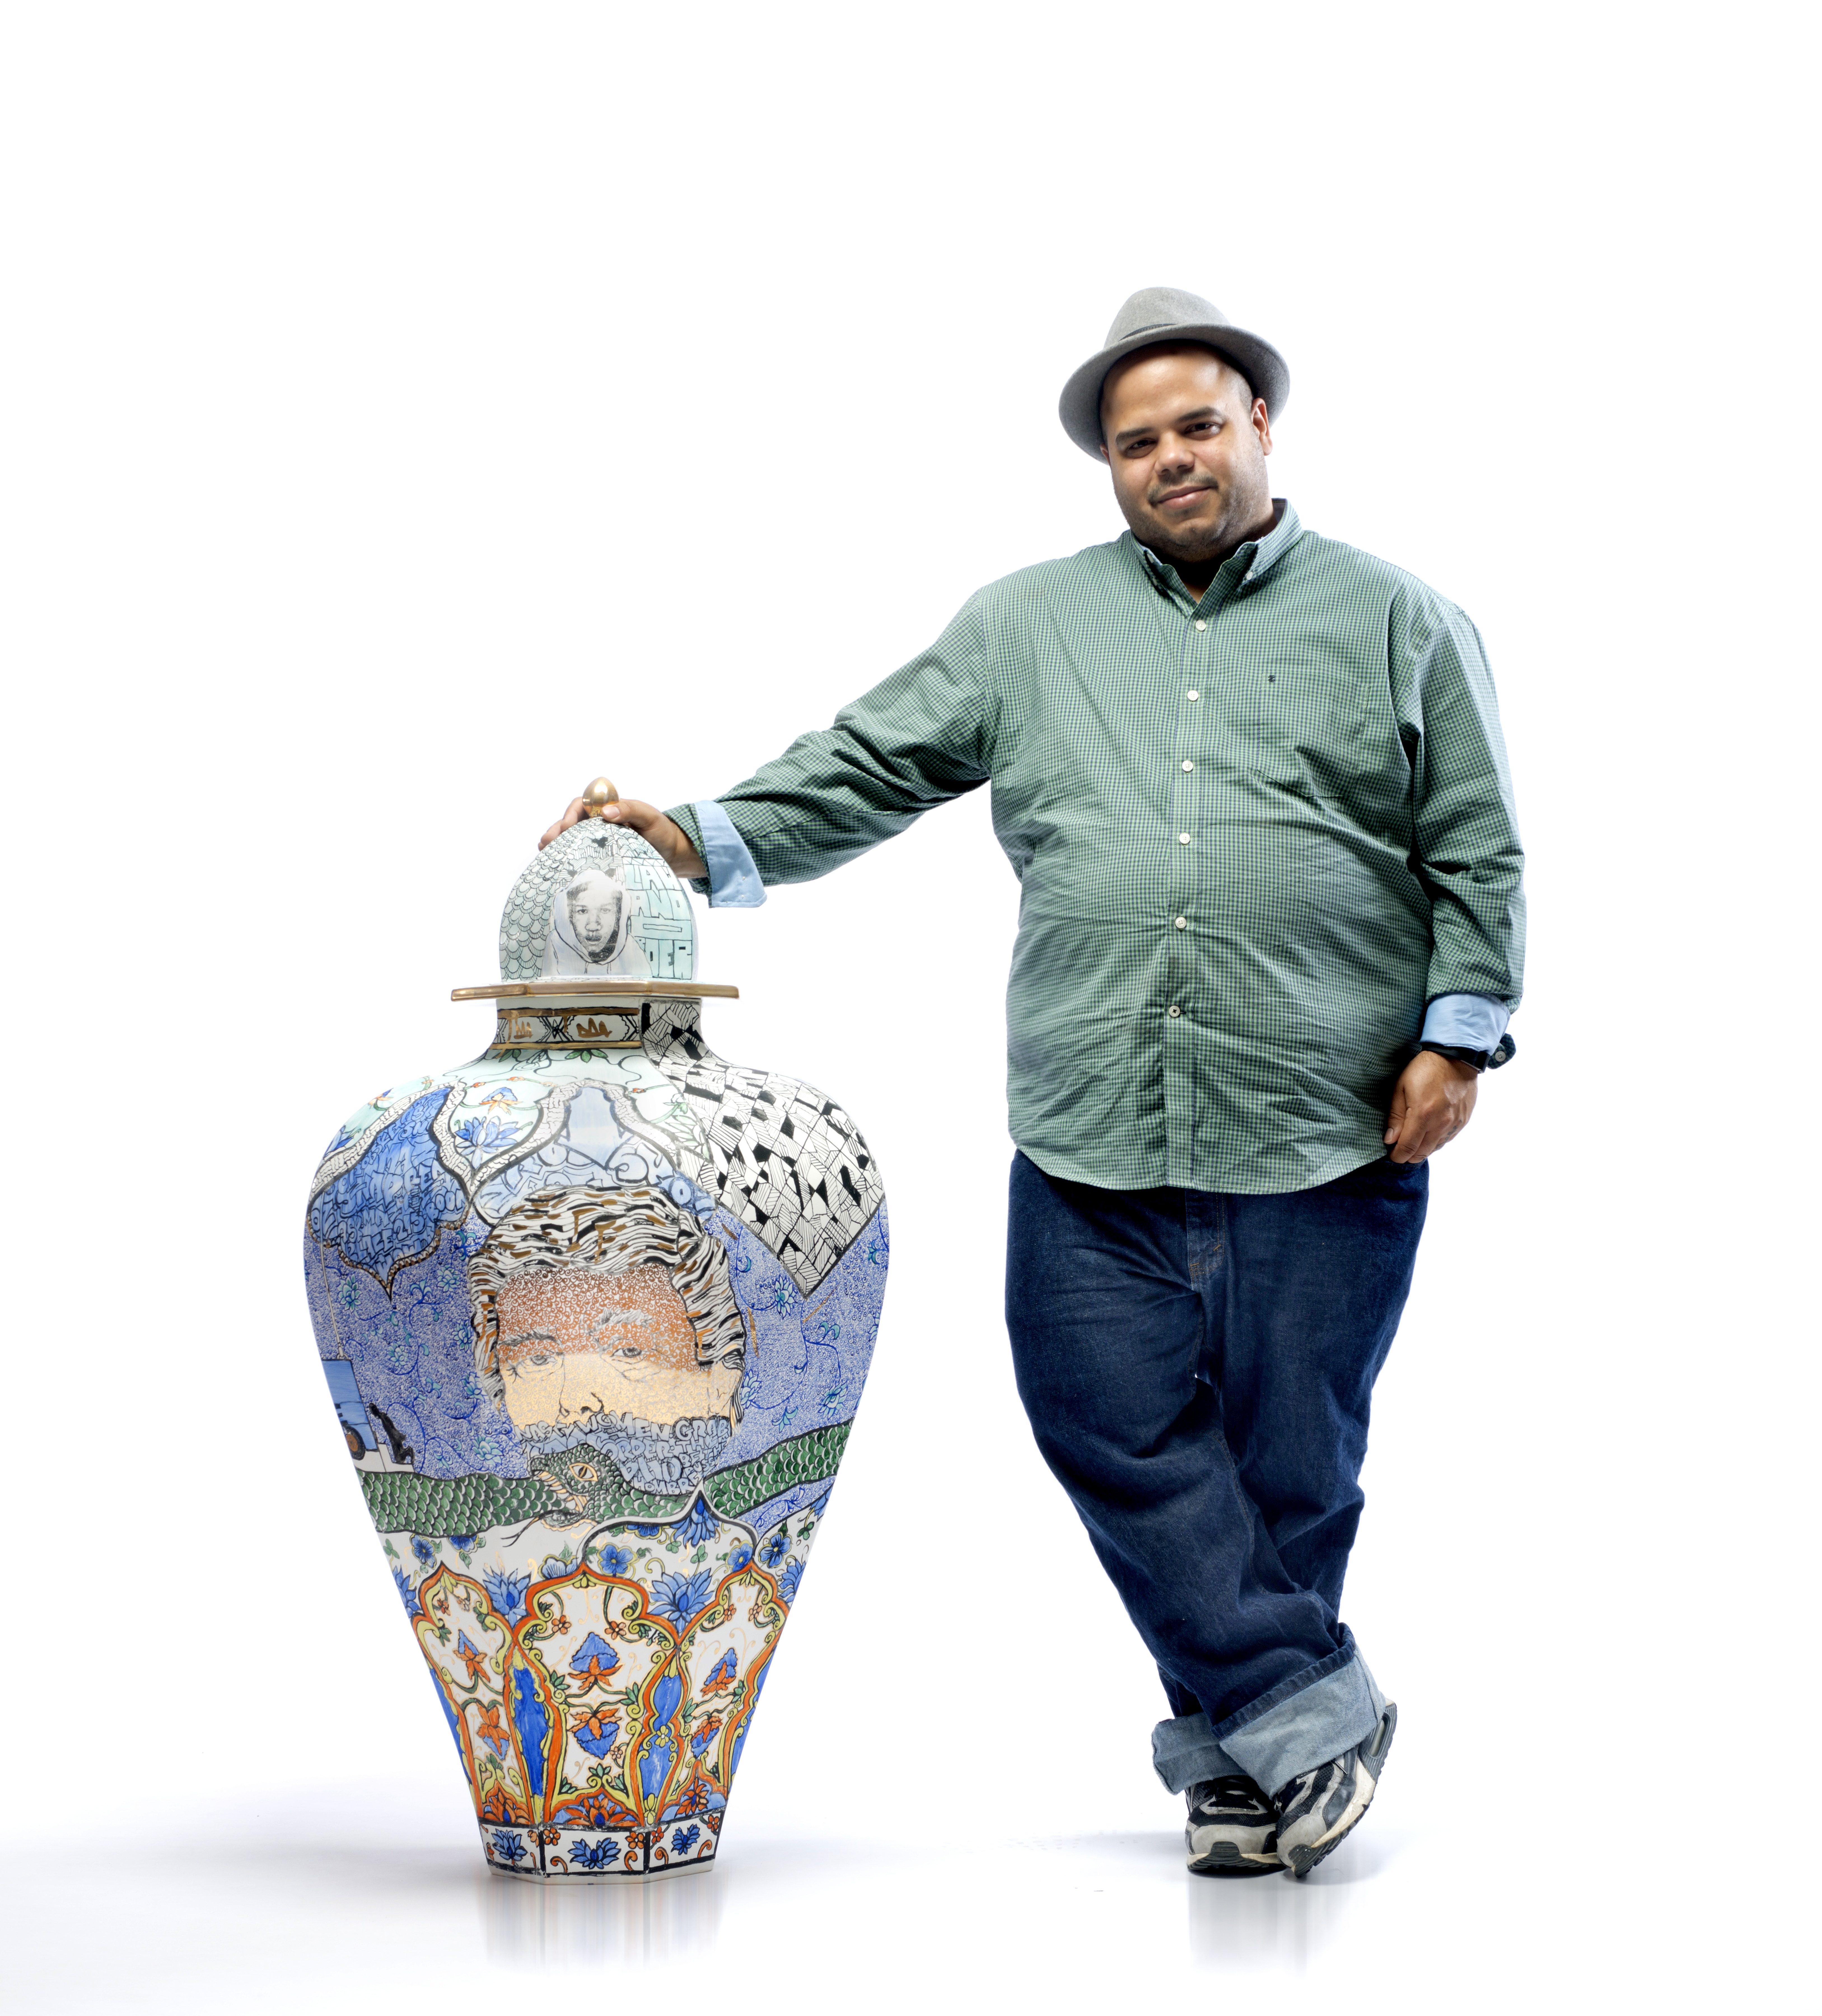 Activist, poet, educator and self-proclaimed “ghetto potter” Roberto Lugo to share powerful message in Denton